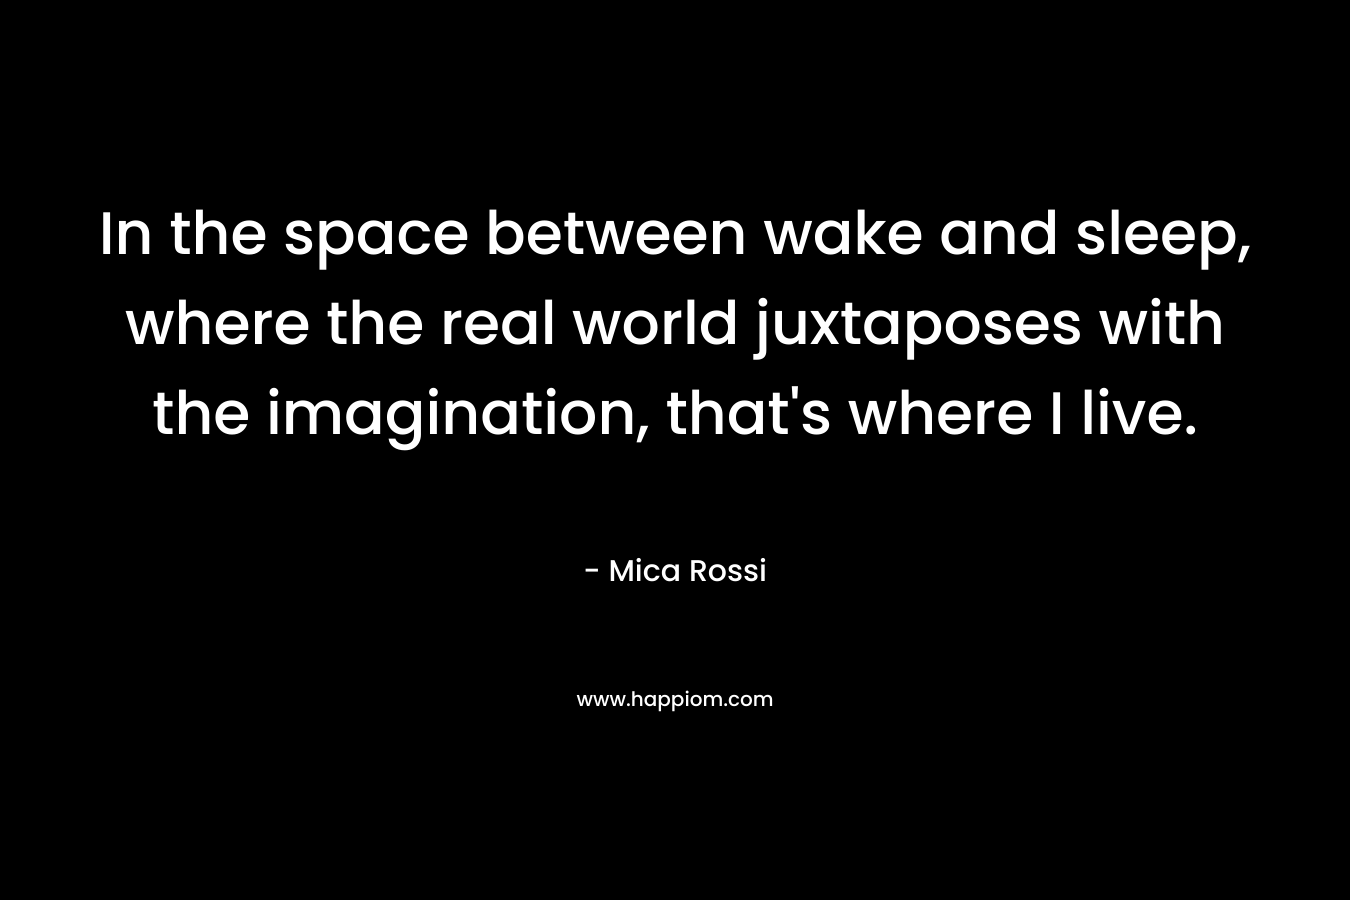 In the space between wake and sleep, where the real world juxtaposes with the imagination, that’s where I live. – Mica Rossi